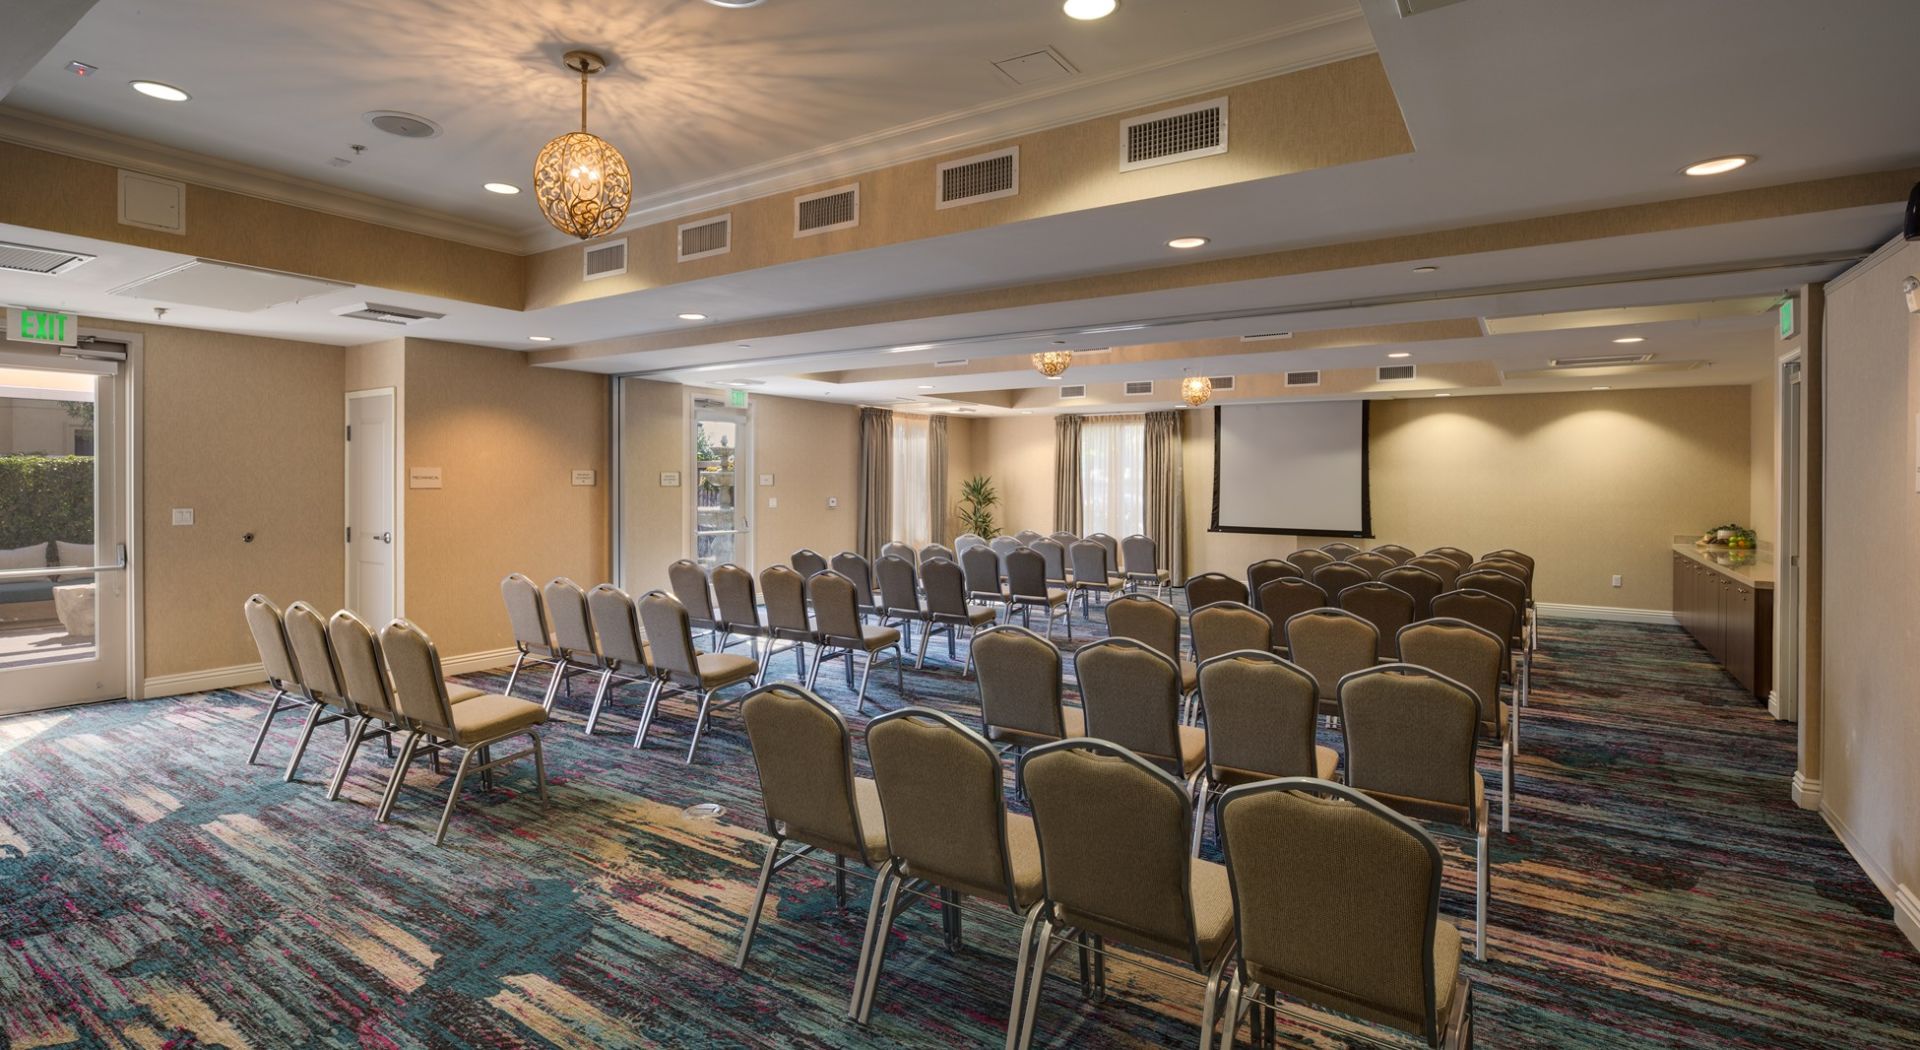 A Room With A Large Group Of Chairs And A Projector Screen